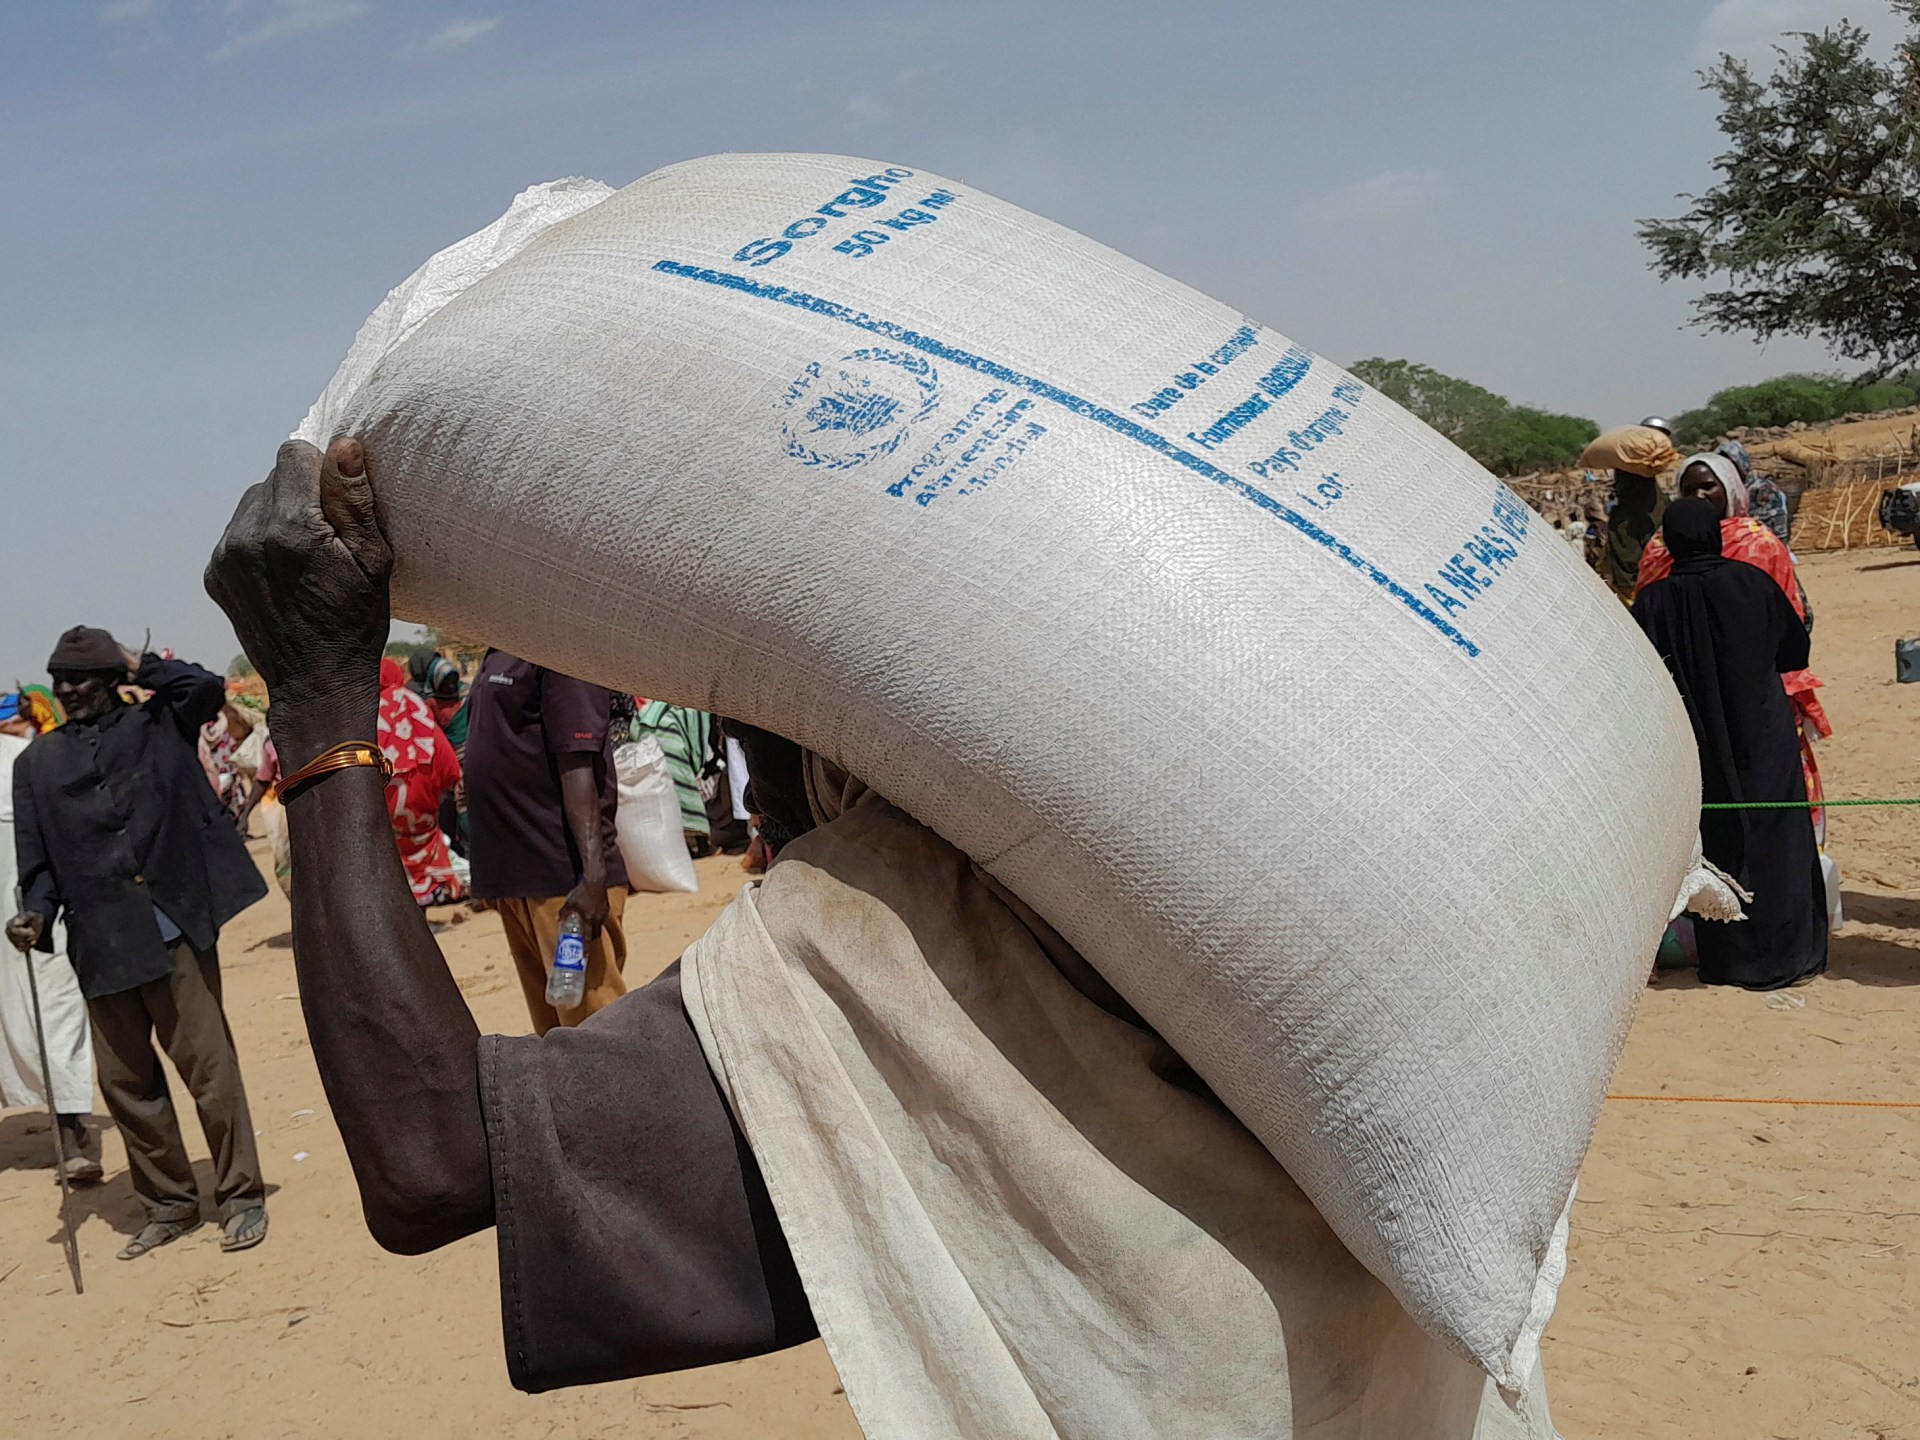 wfp-temporarily-halts-food-aid-in-parts-of-sudan-as-fighting-spreads